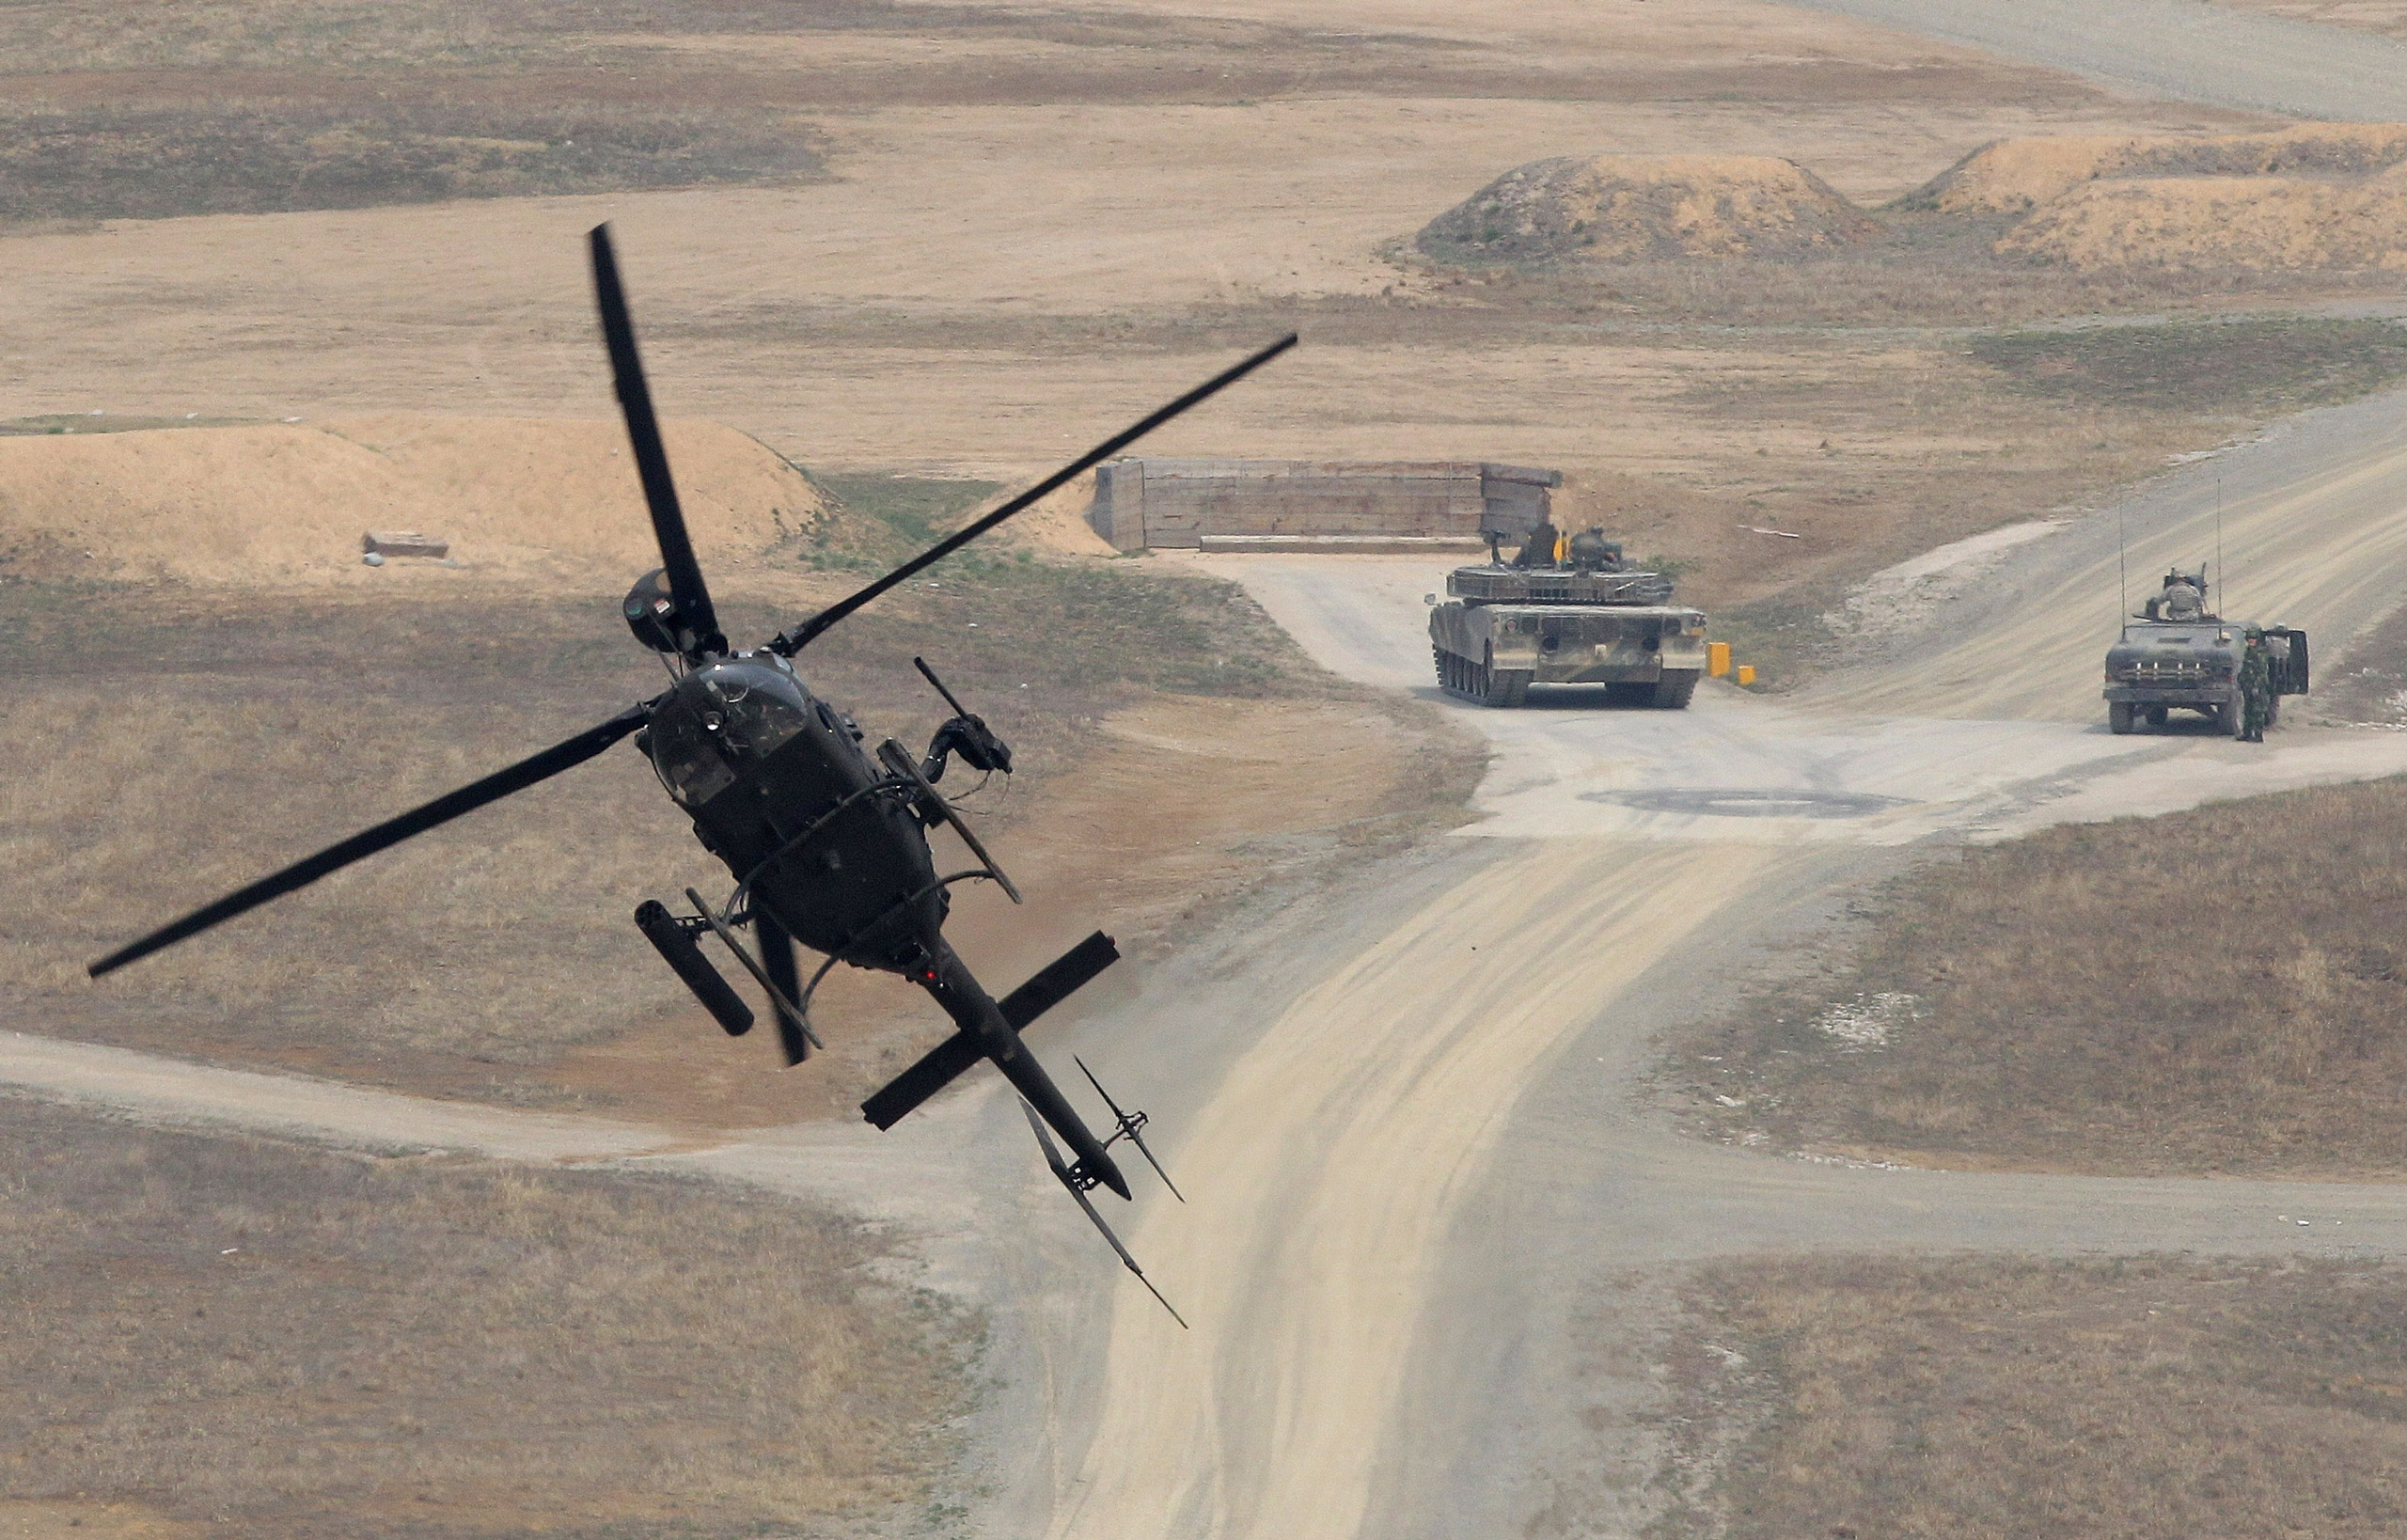 A Kiowa Warrior helicopter hover during the United States and South Korean Joint live fire Exercise at Rodriguez Range in Pocheon, South Korea, on Apr. 11, 2014. (Chung Sung-Jun—Getty Images)